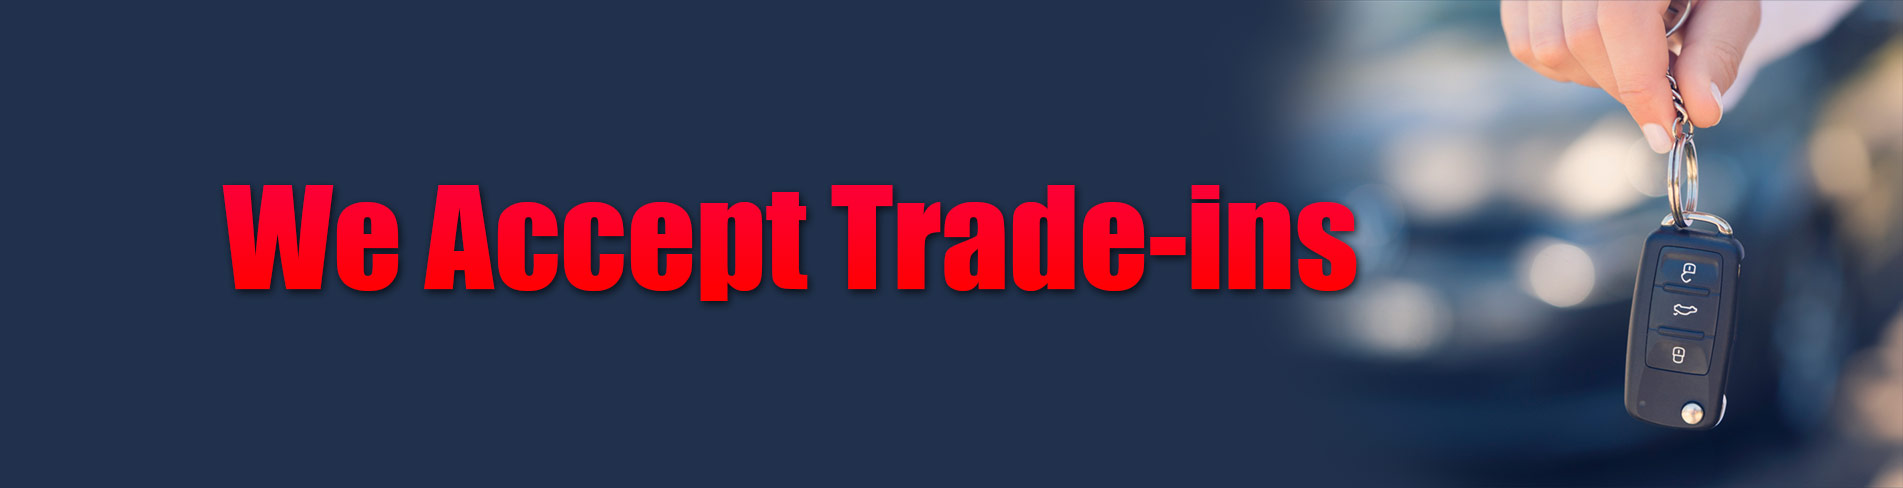 We accept Trade-ins